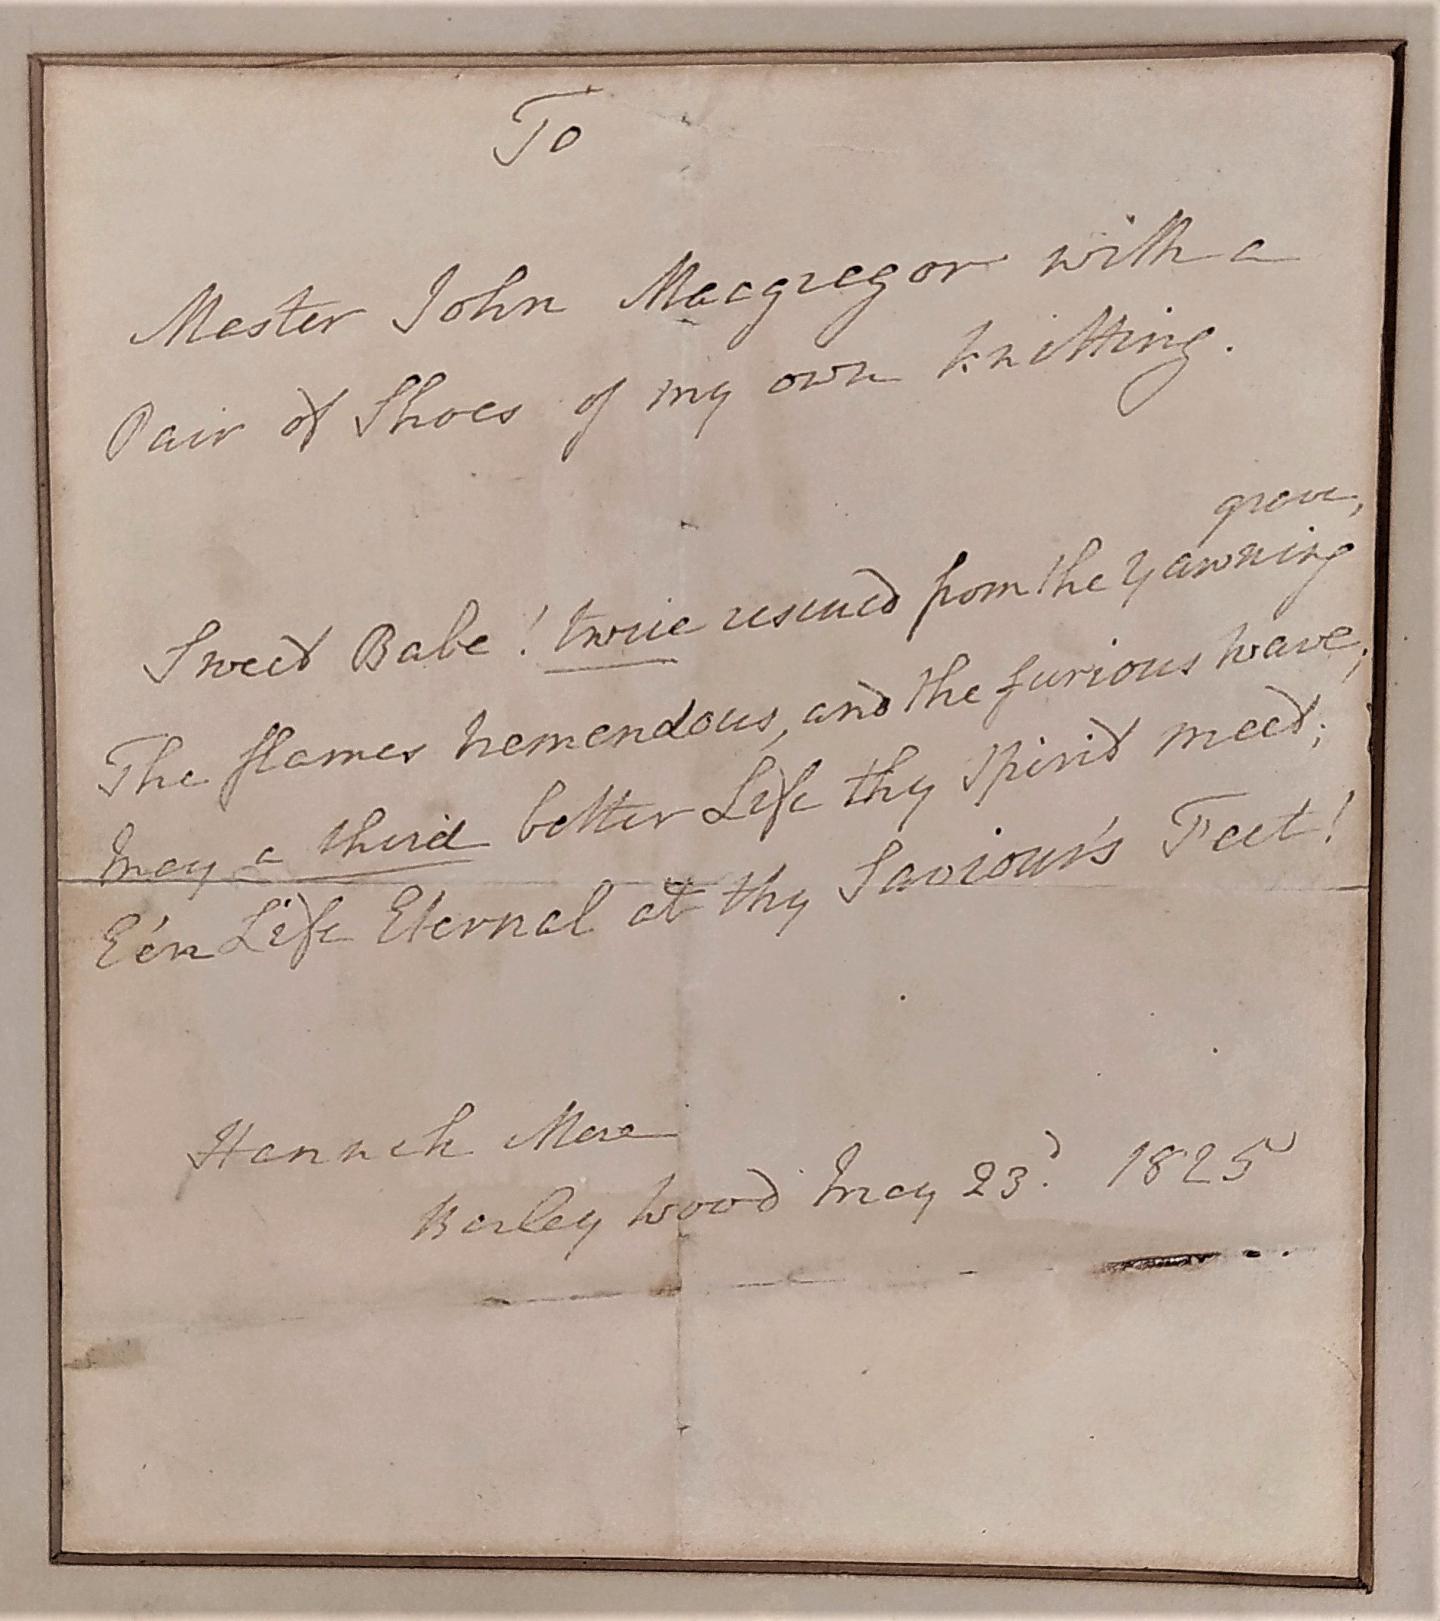 Letter to John MacGregor from Hannah More (RMG reference: MCG/2/2)